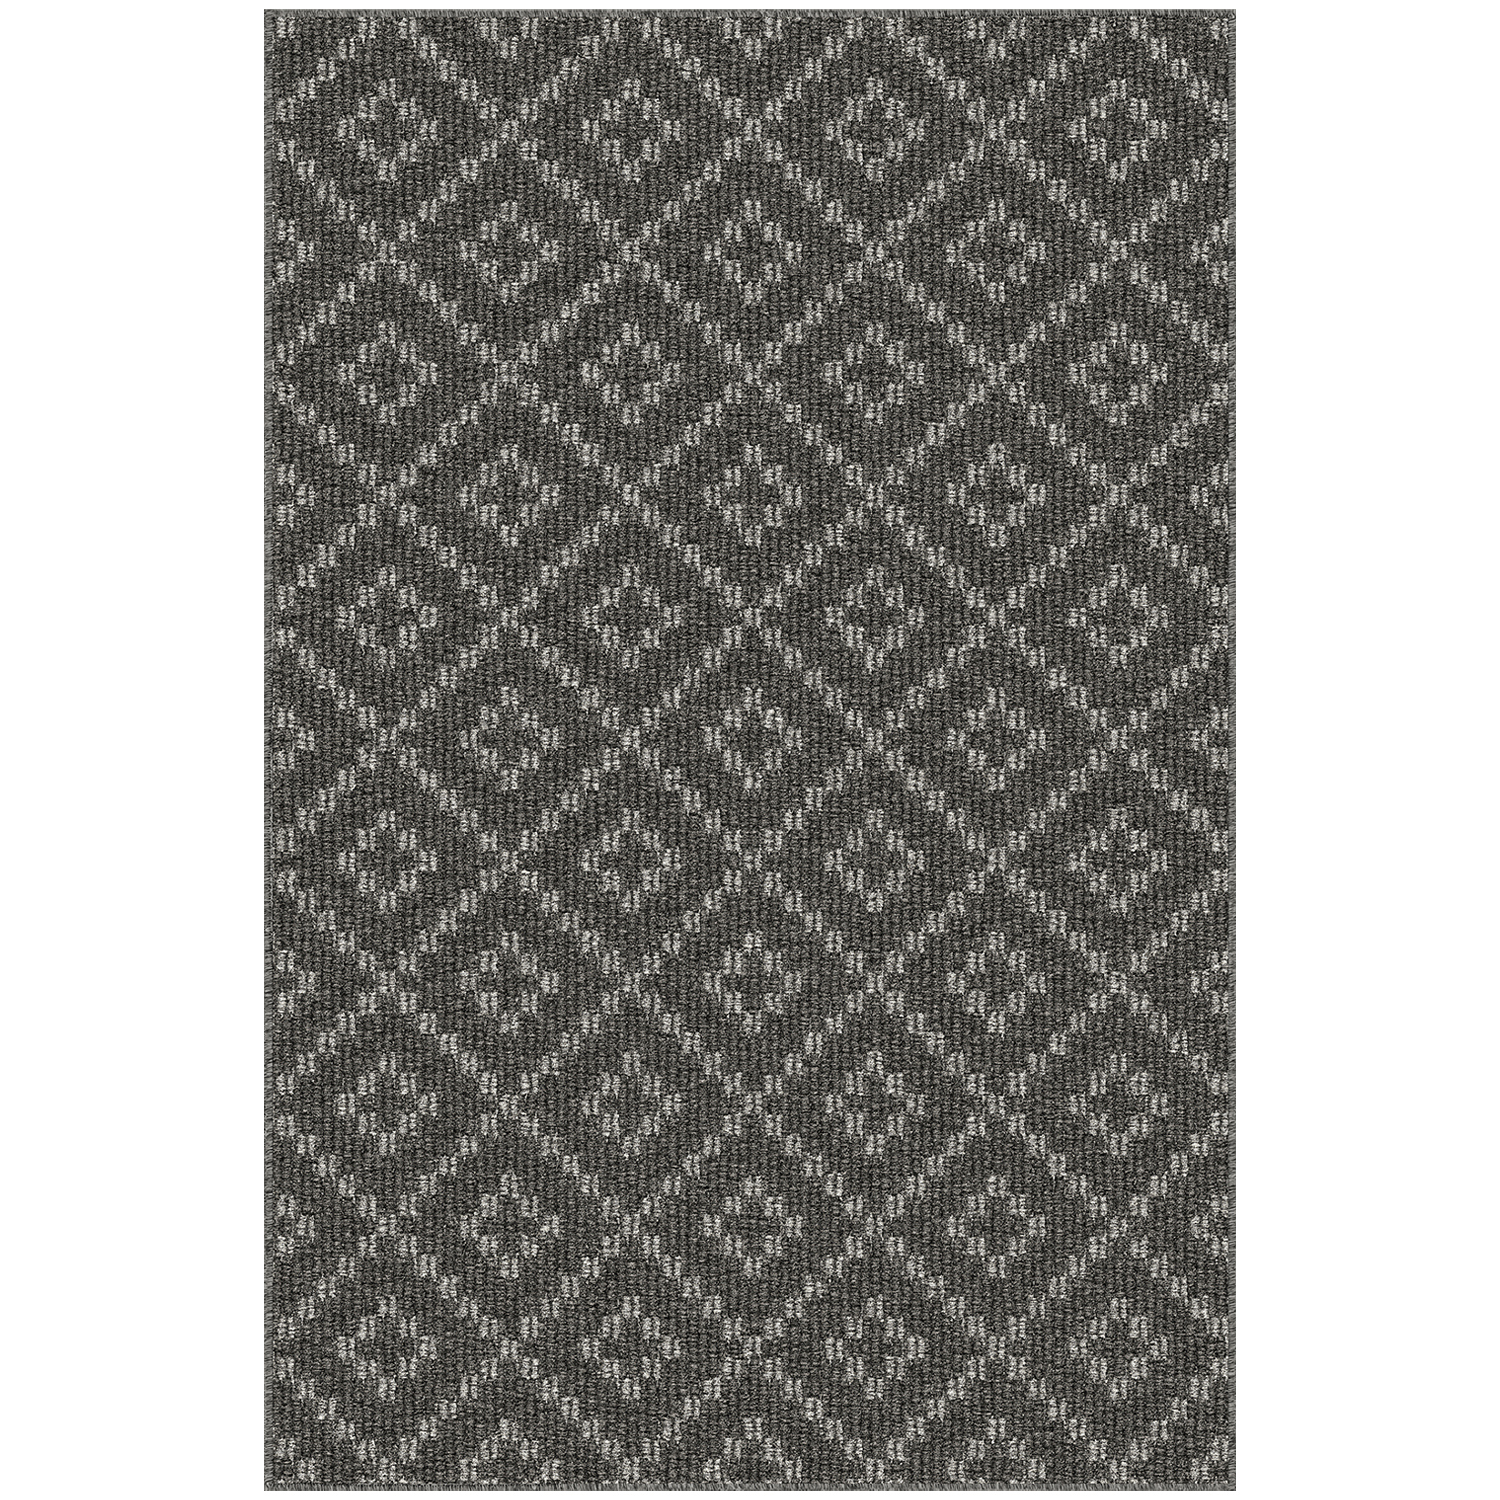 HARLOW Collection - Willow rug, 2'x3'